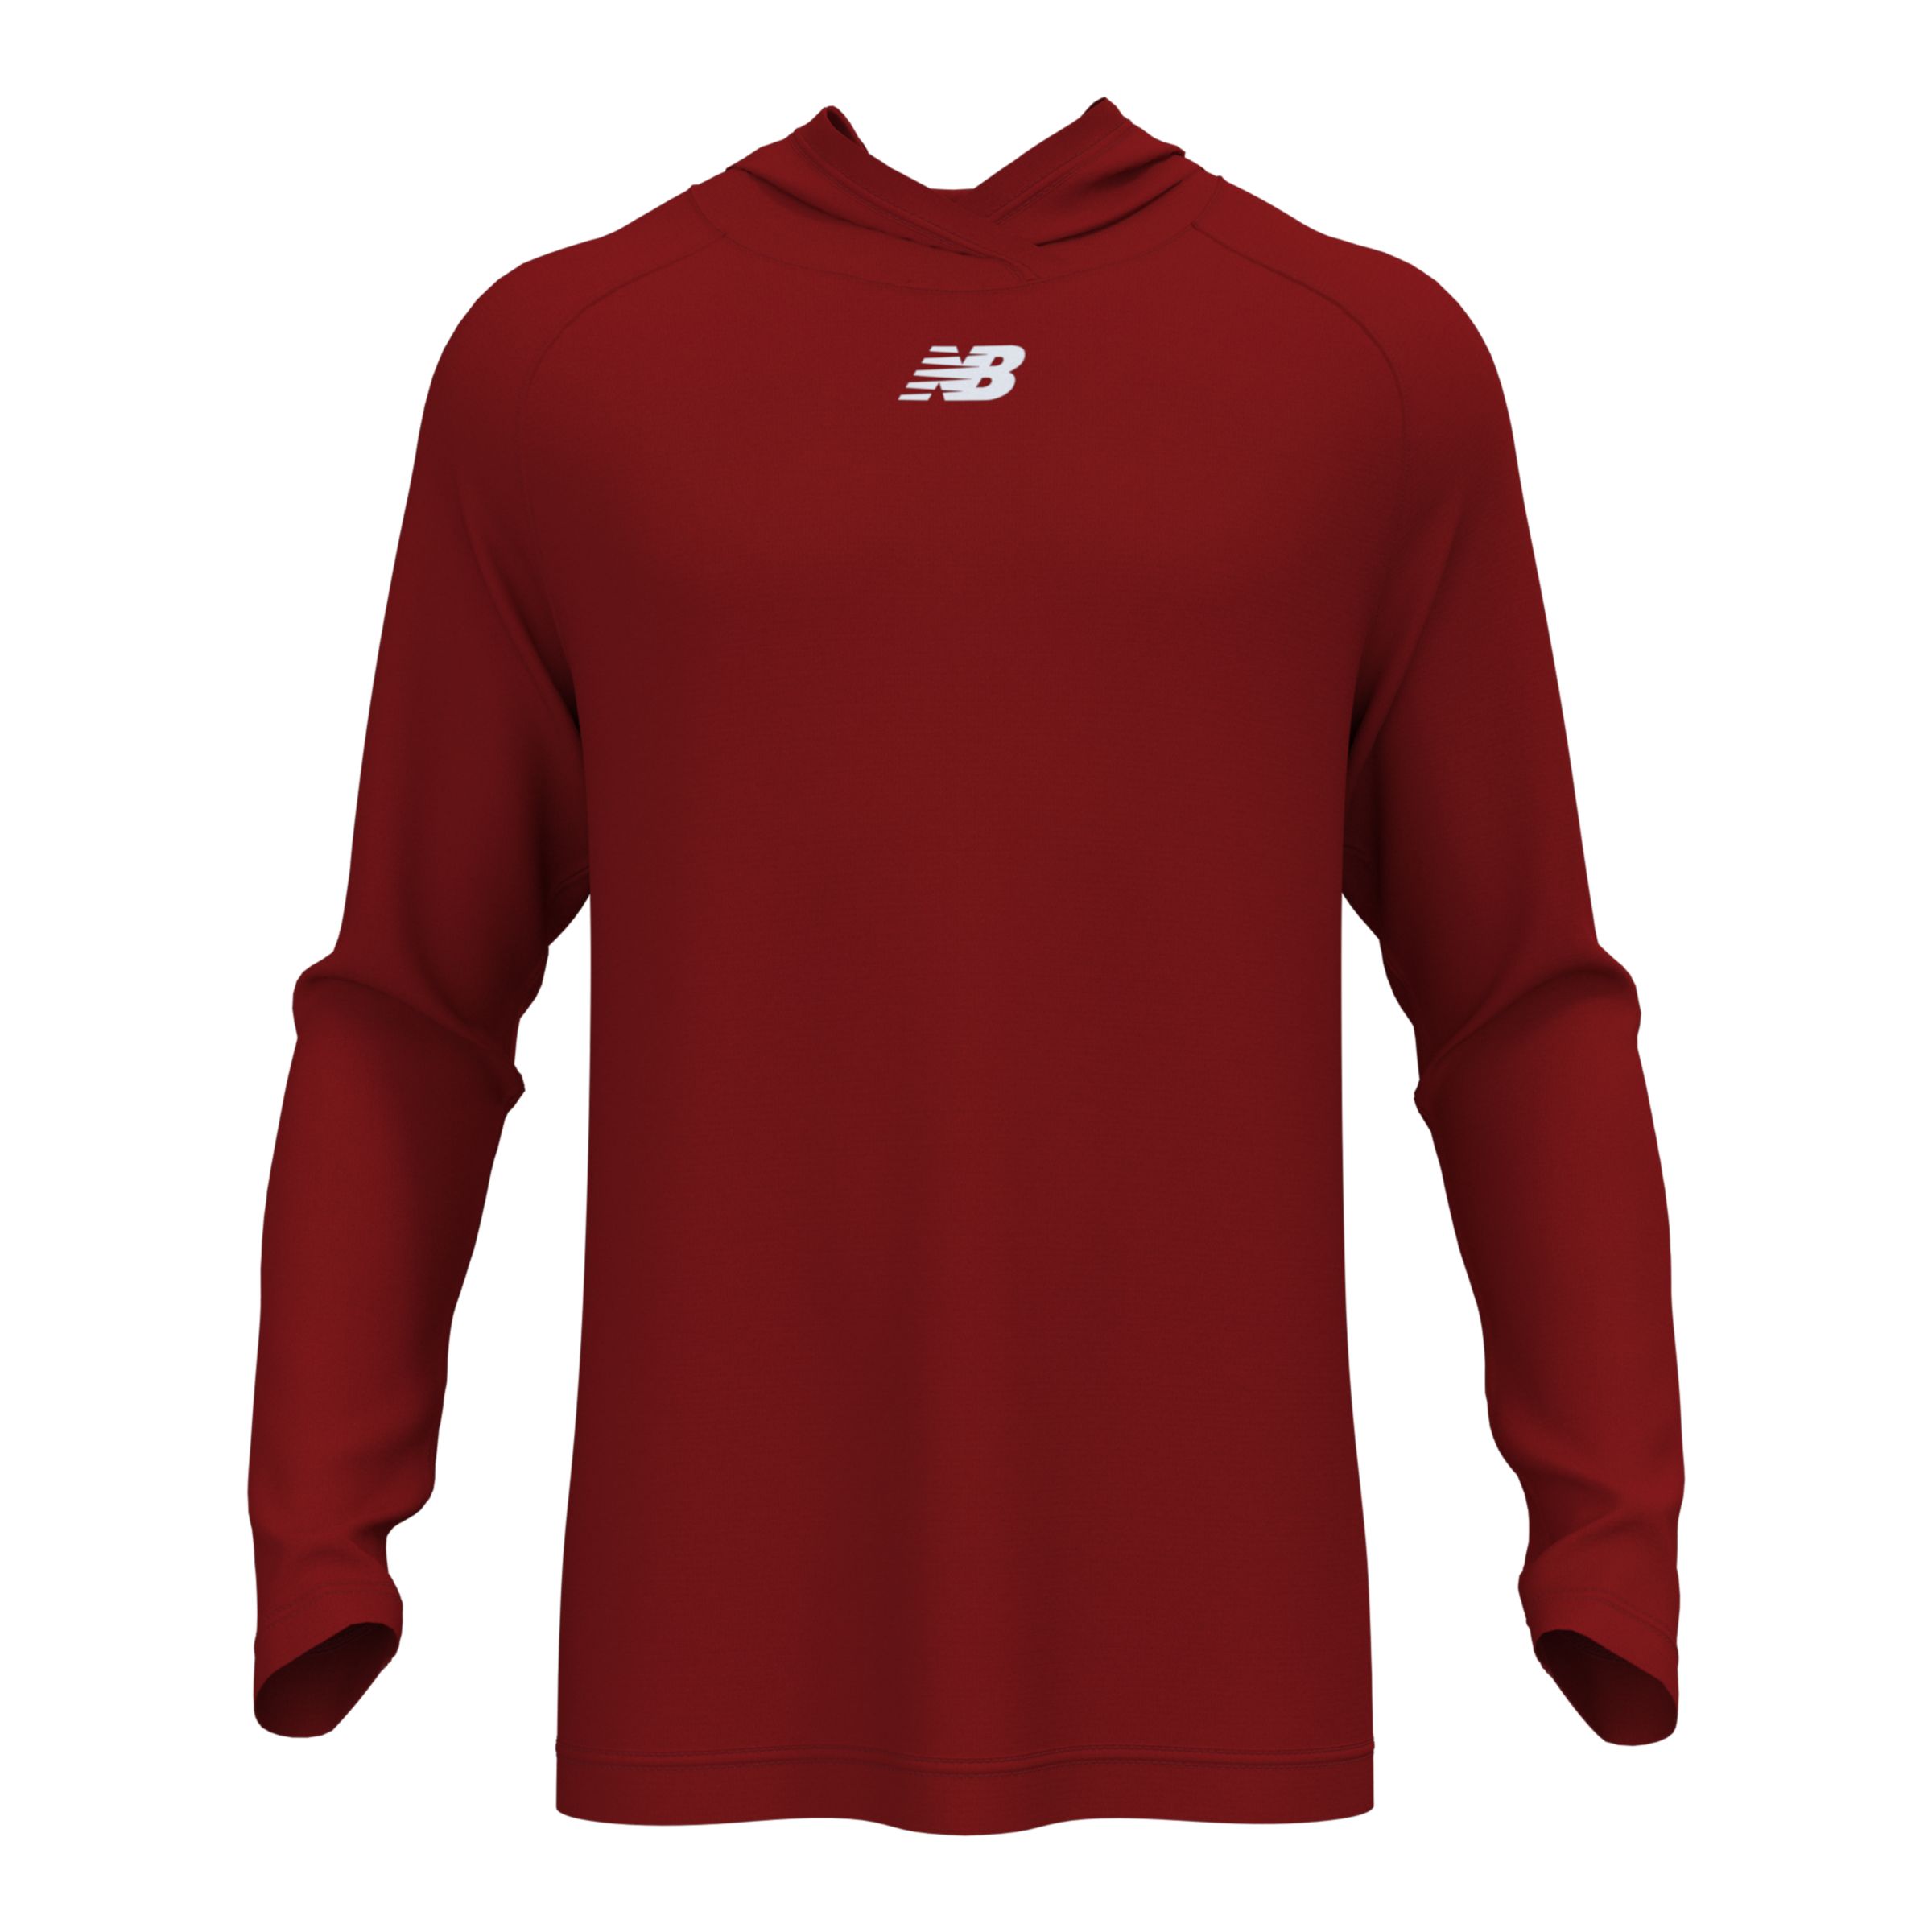 Essentials Cotton Jersey Athletic Fit T-Shirt - New Balance